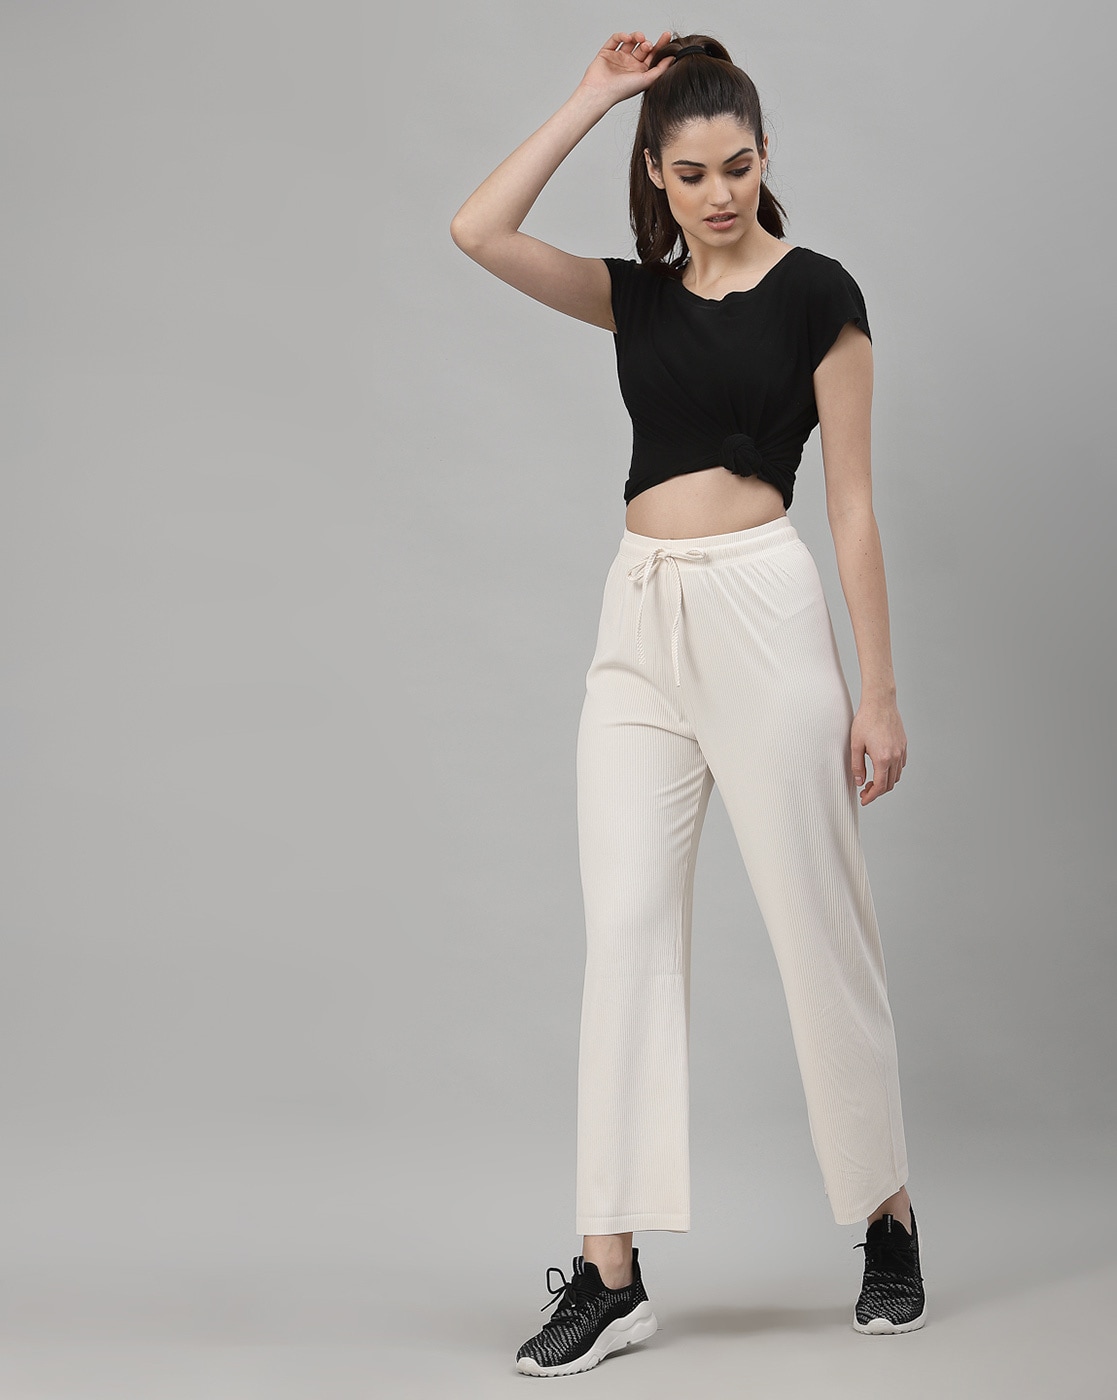 Buy White Track Pants for Women by NEUDIS Online